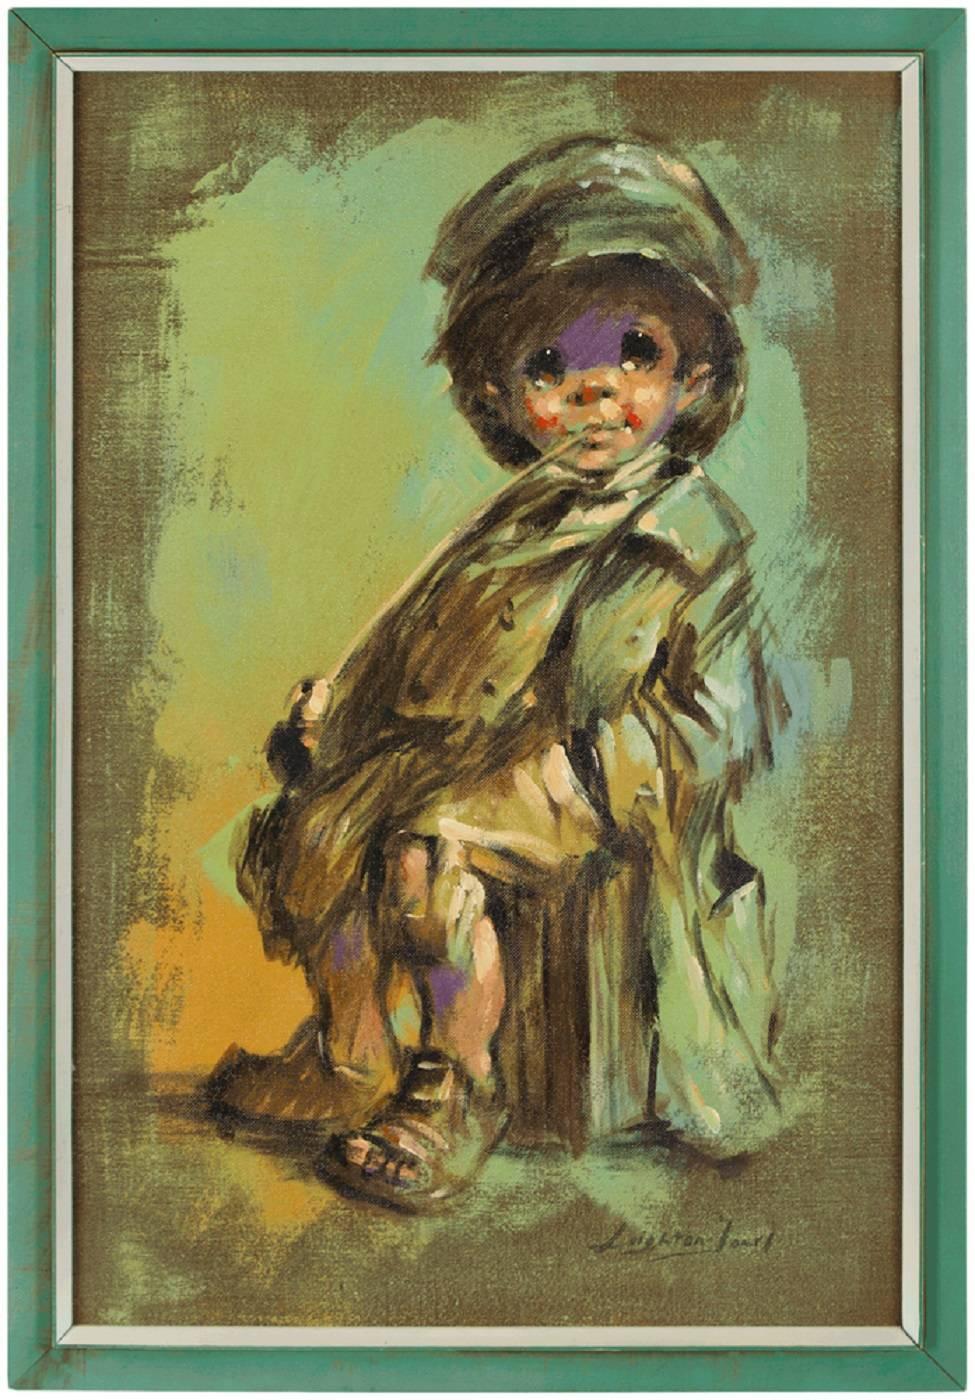 Barry Leighton-Jones Figurative Painting - Runaway Child, Expressionist Oil Painting